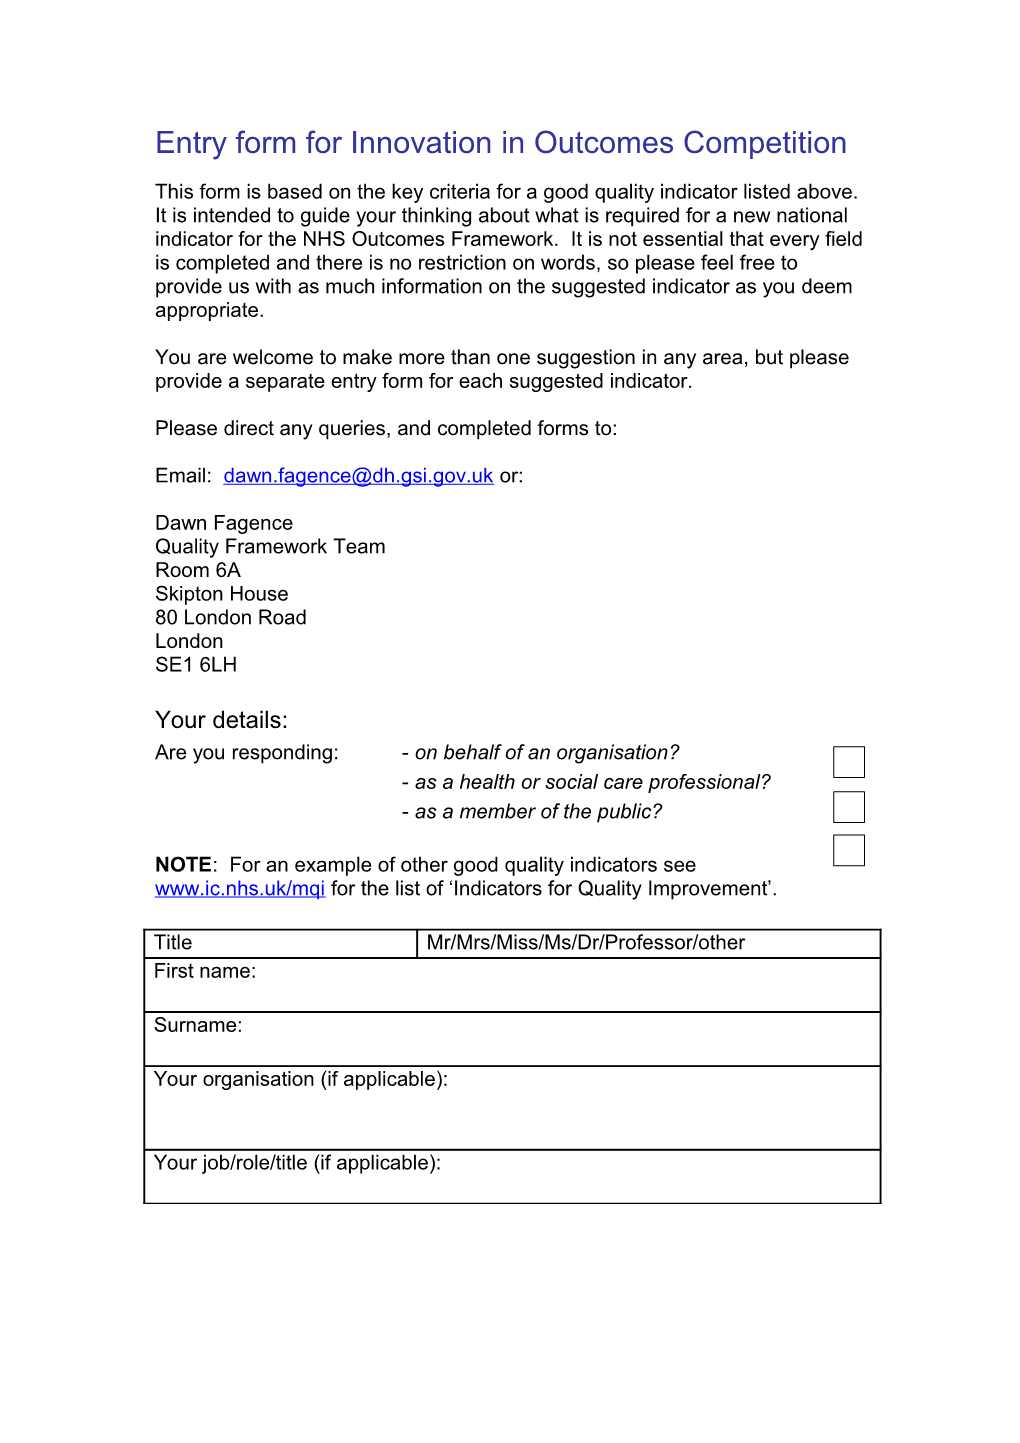 Entry Form for Innovation in Outcomes Competition